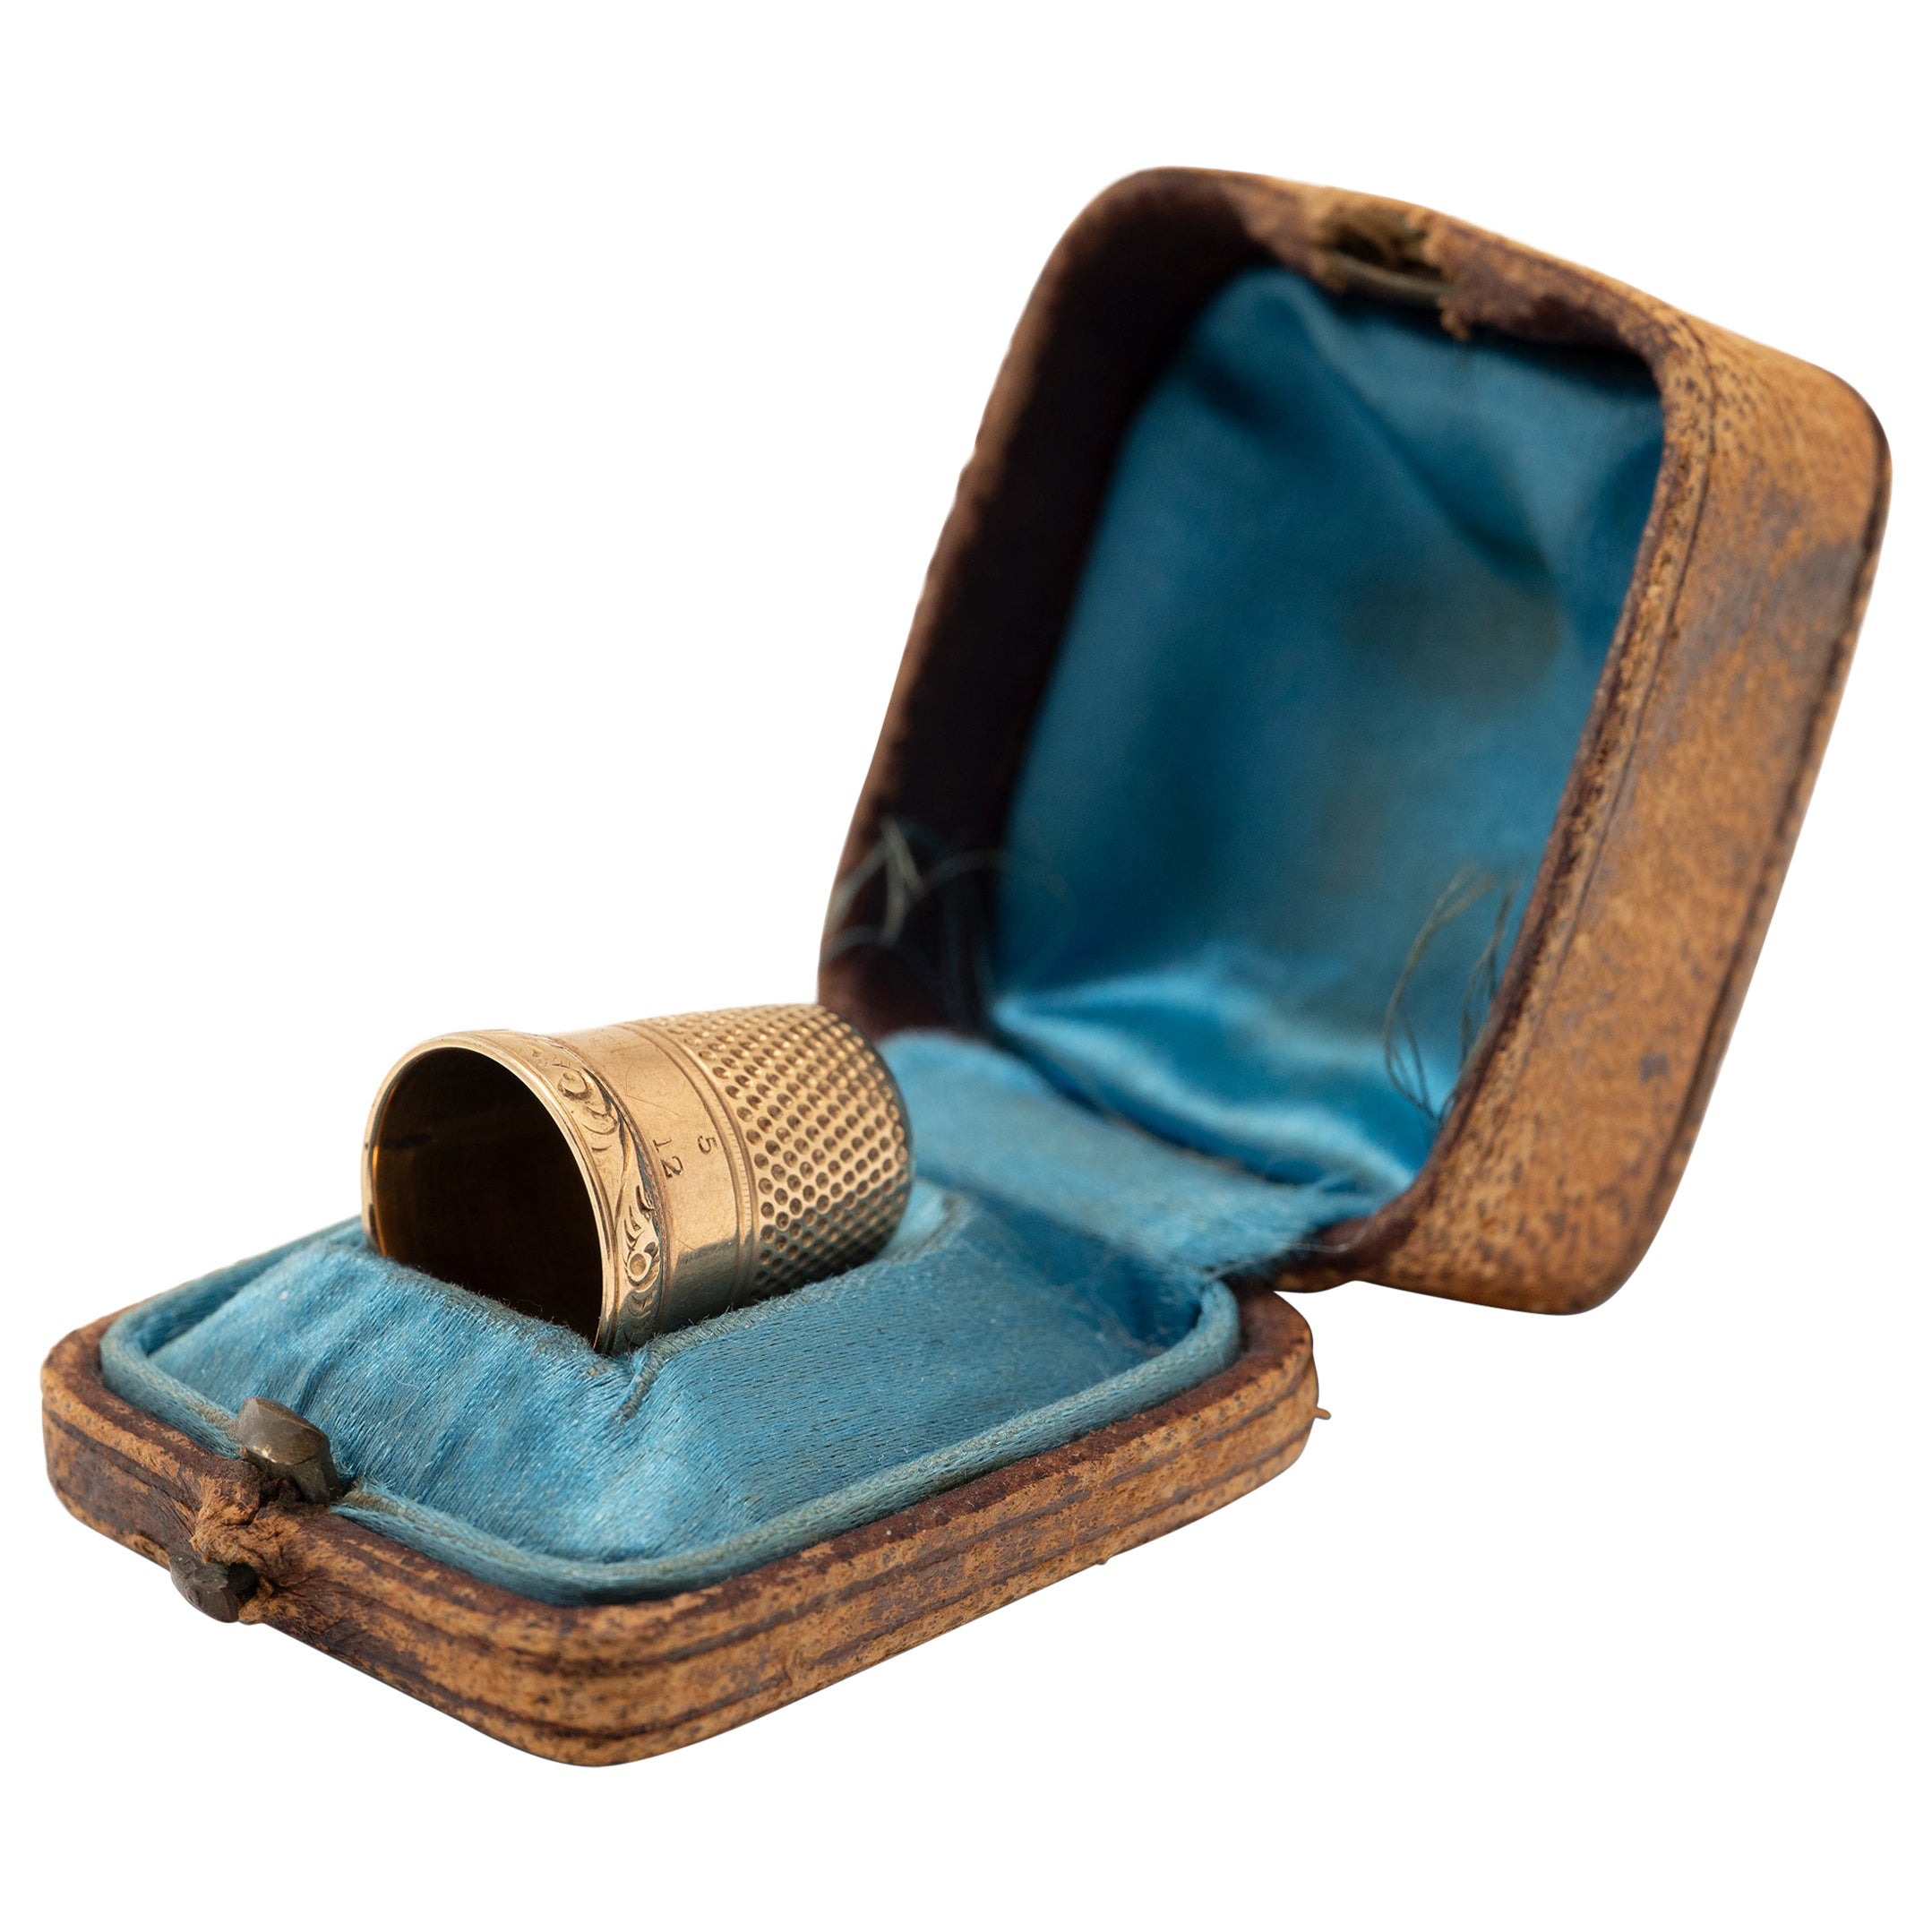 12K Gold Thimble in Leather Case, c. 1900